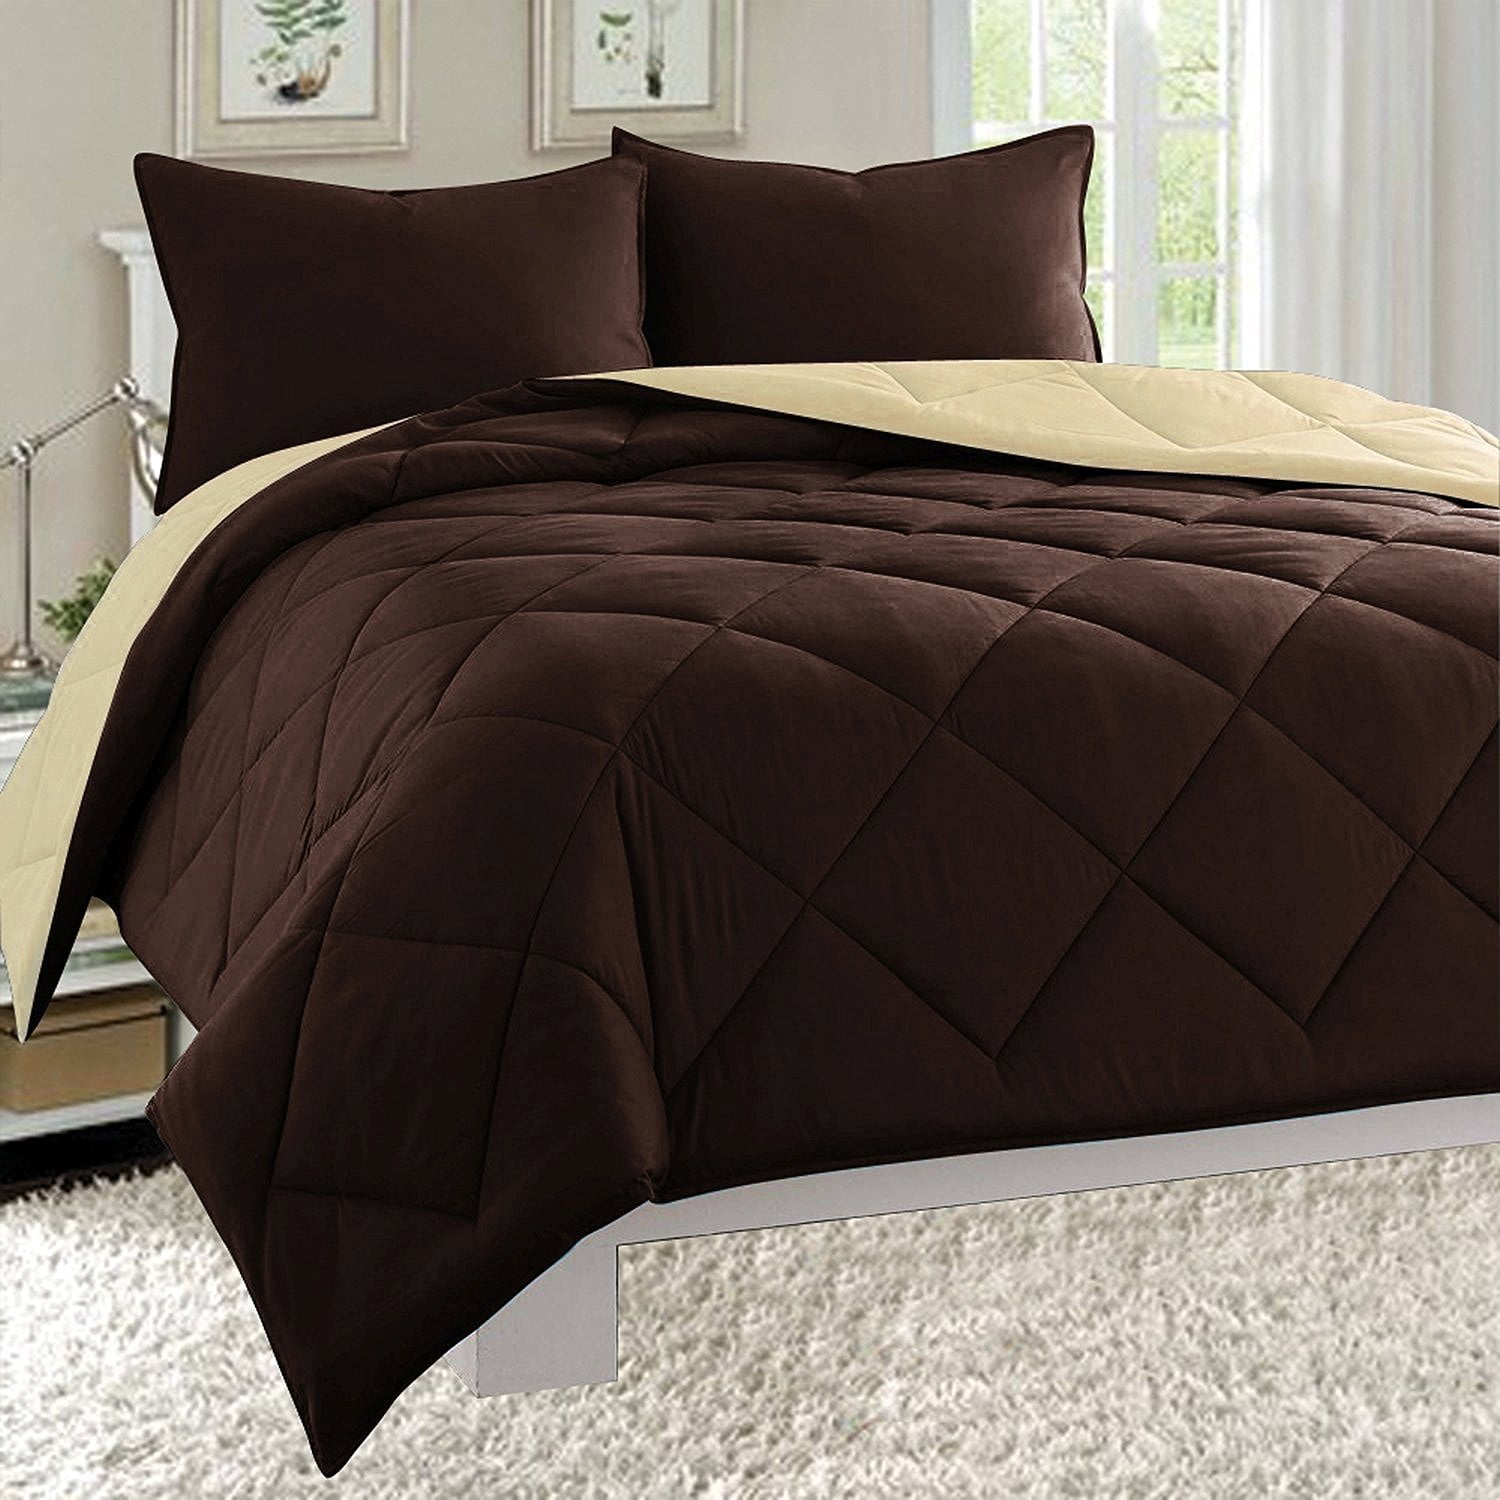 Close Out Deal High Quality 2pc Comforter Set Twin Brown Cream